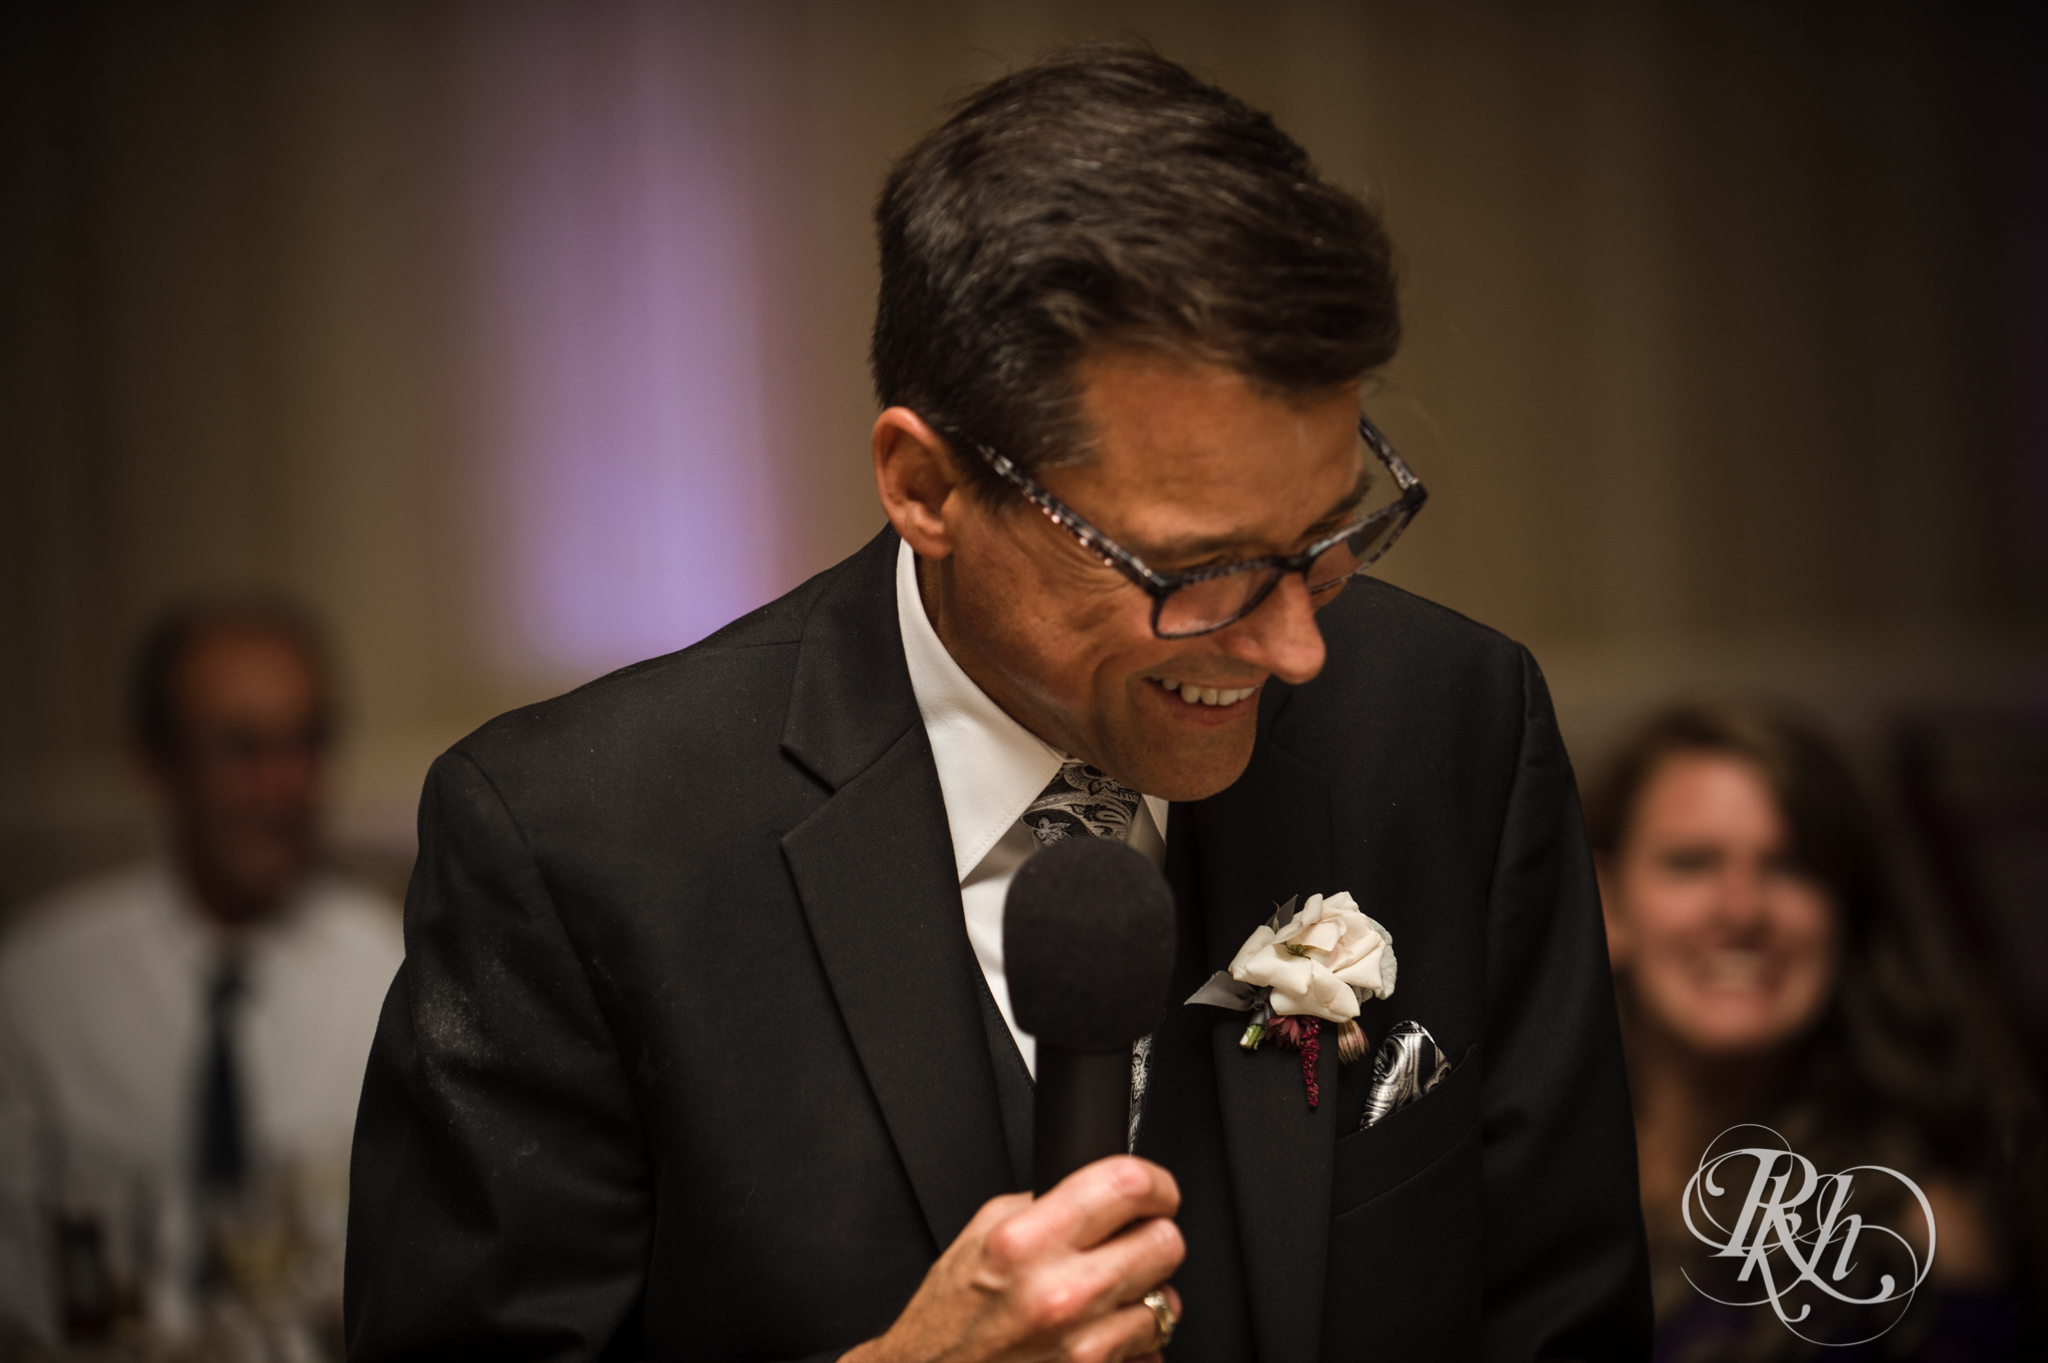 Father of bride smiles during wedding reception at the Saint Paul Hotel in Saint Paul, Minnesota.